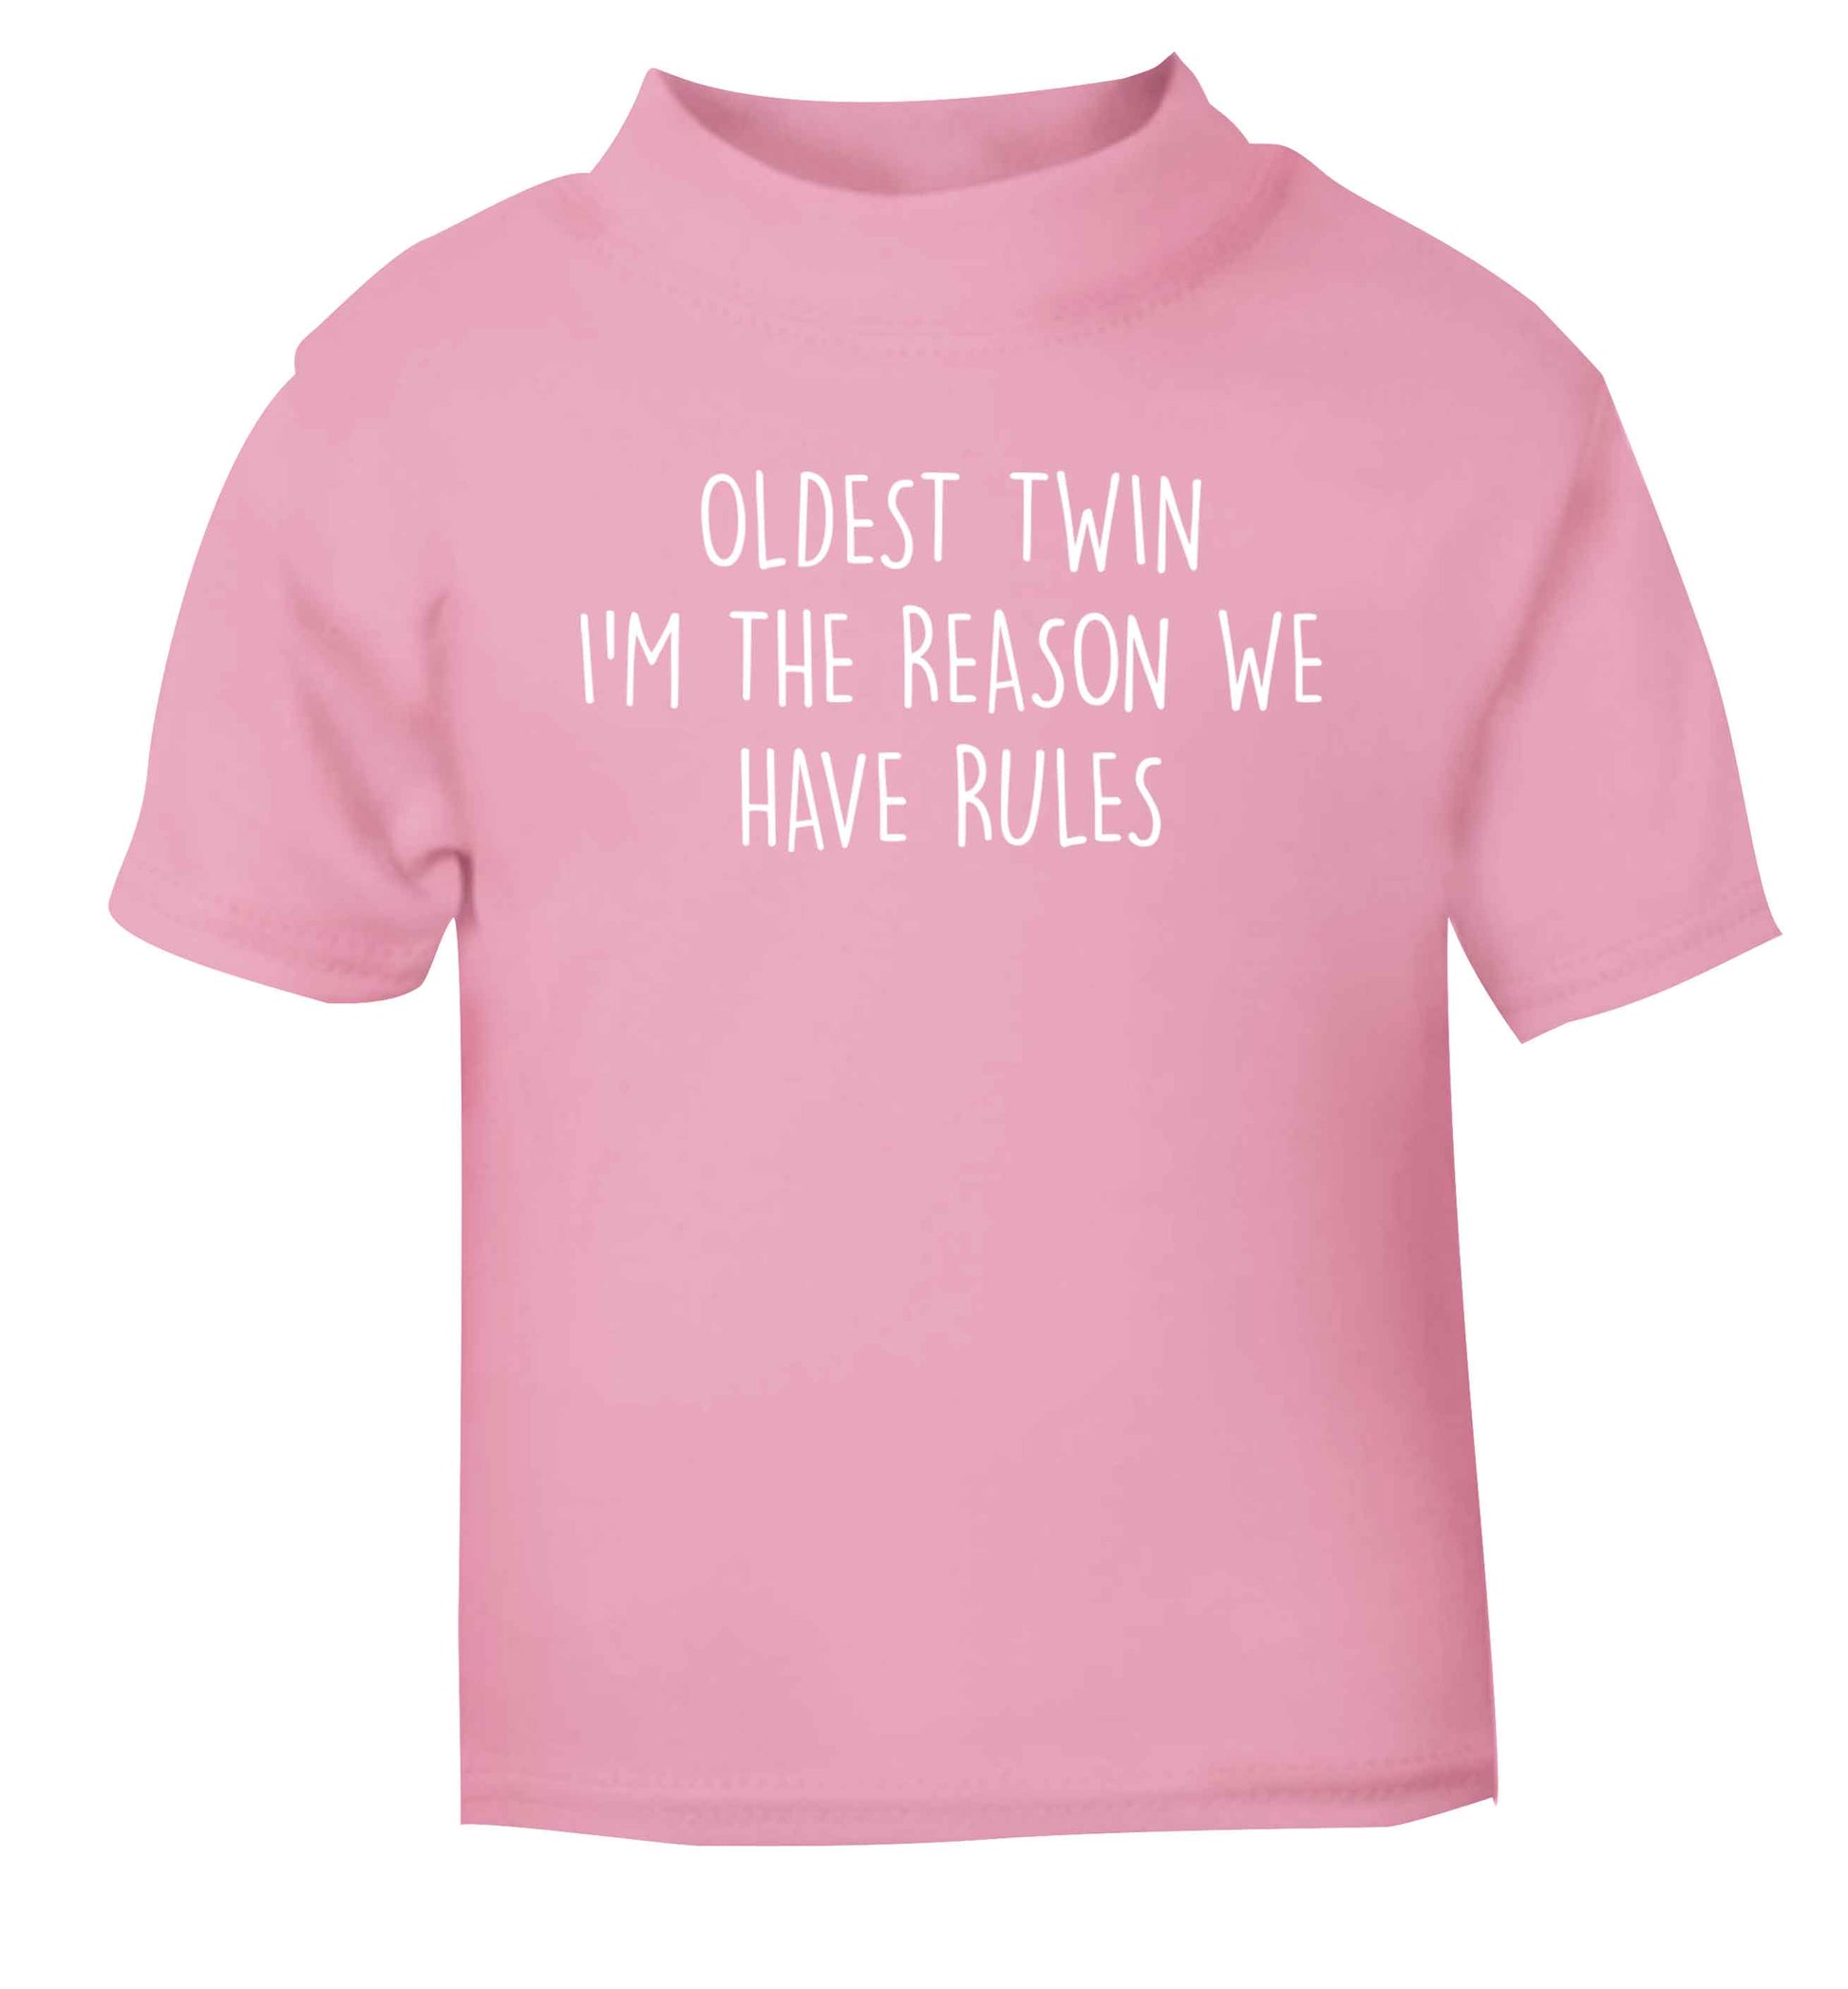 Oldest twin I'm the reason we have rules light pink baby toddler Tshirt 2 Years